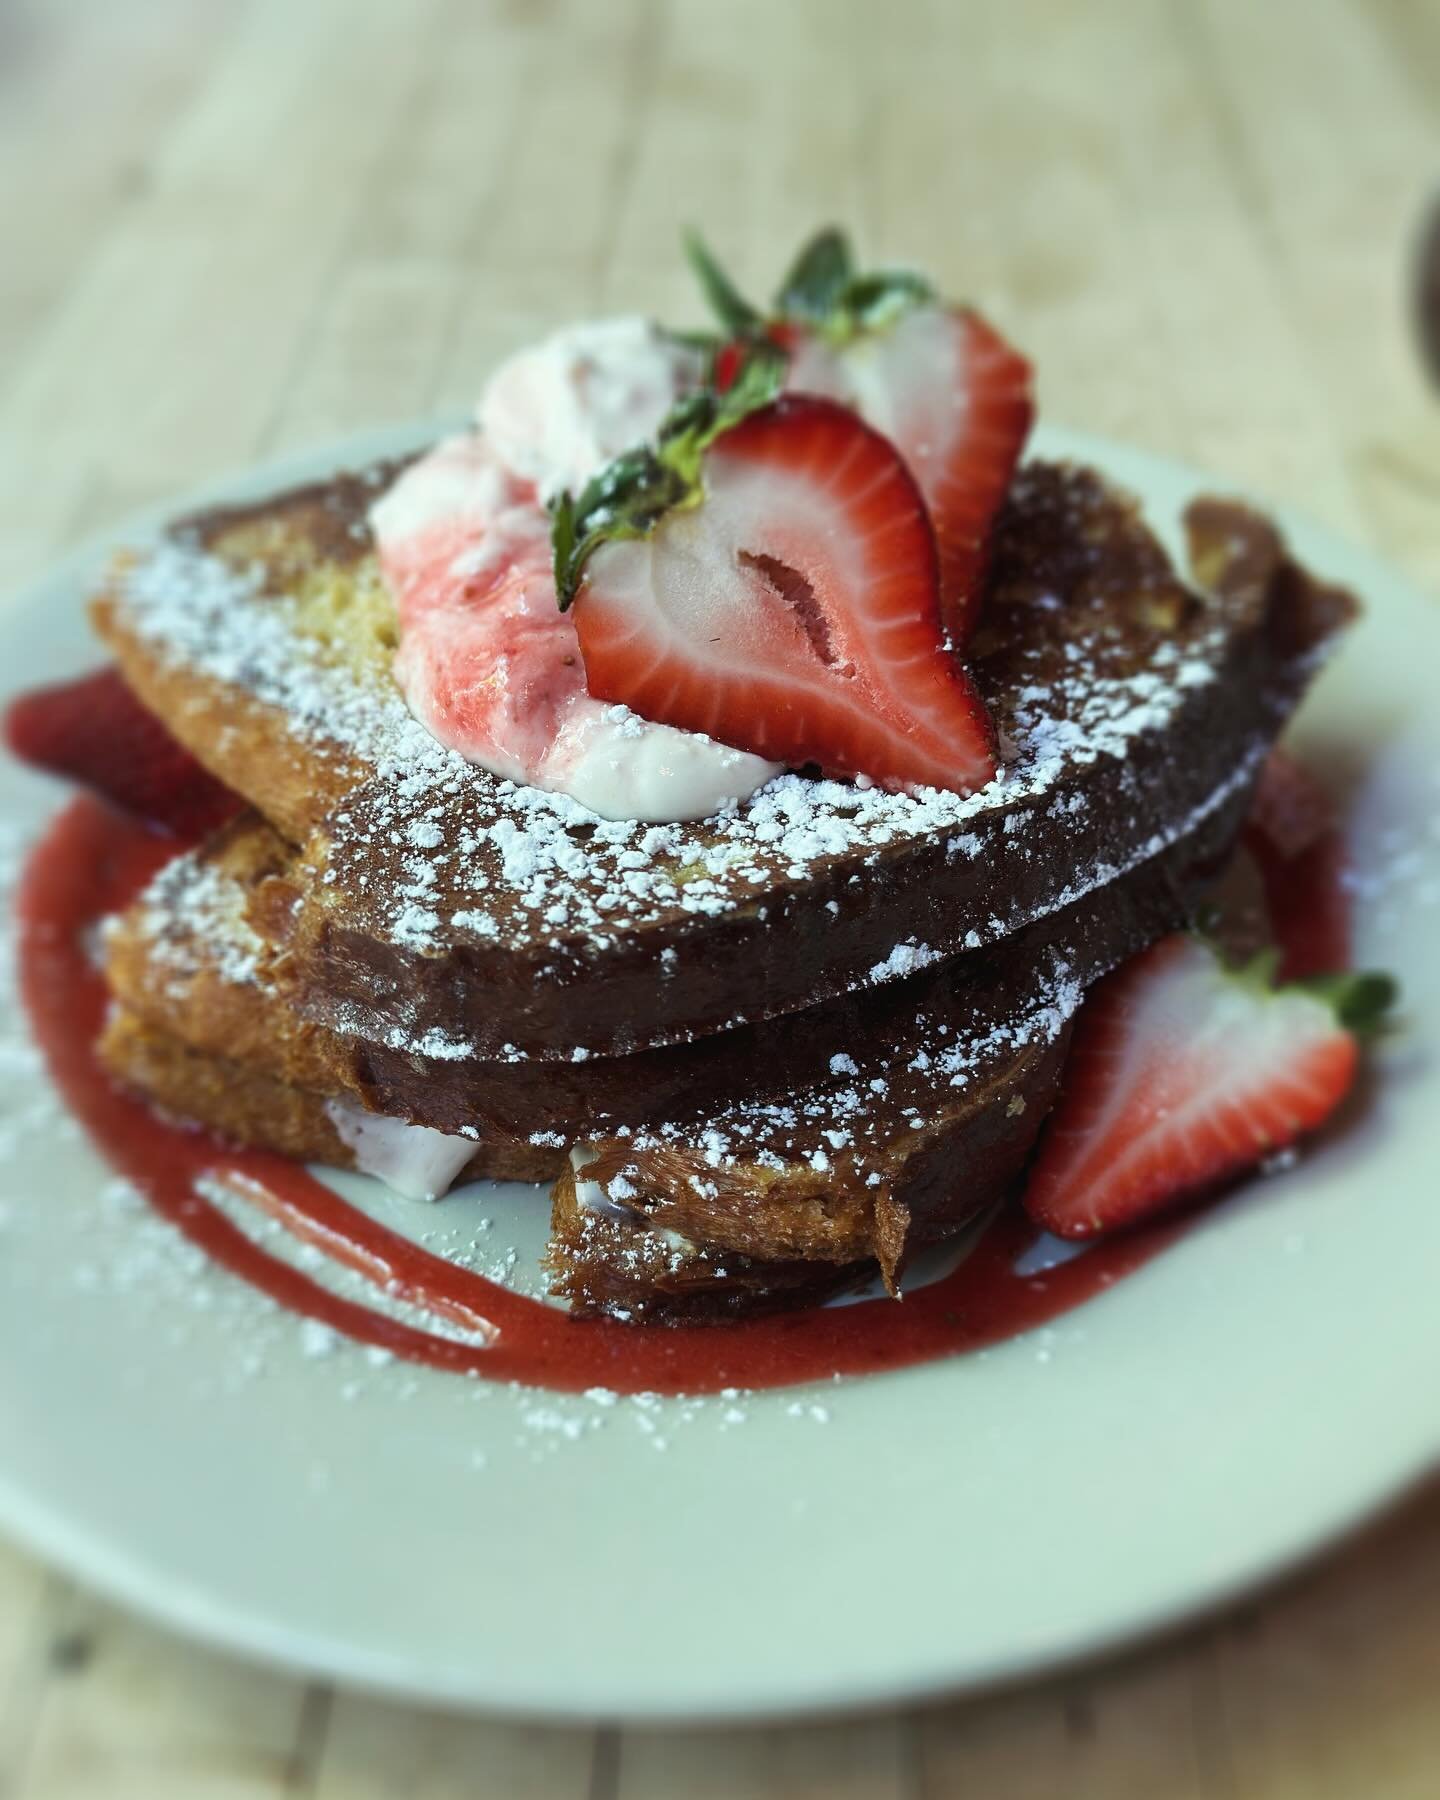 Specials this weekend! Sweet: Strawberry Cheesecake French Toast, with sweet cream cheese, strawberry syrup, @tgmbread challah. Savory: Crab Cake Hash, with crab cakes, sunny eggs, spring peas, roasted baby carrots, spring onions, yukon gold potatoes